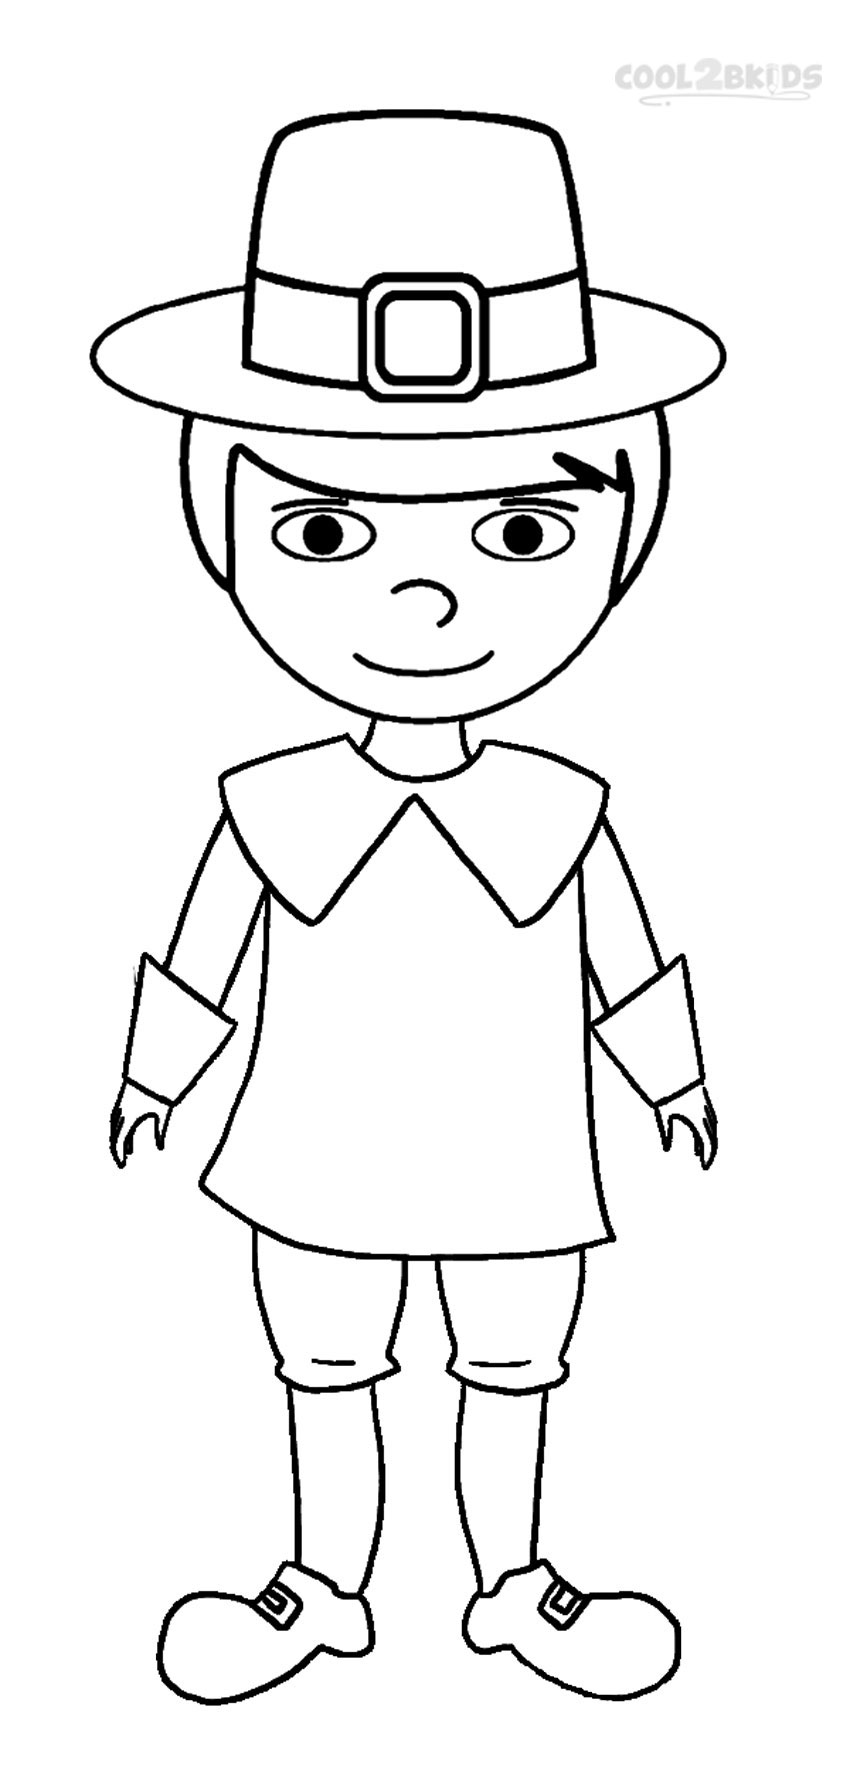 Pilgrim Boy Coloring Pages to Print